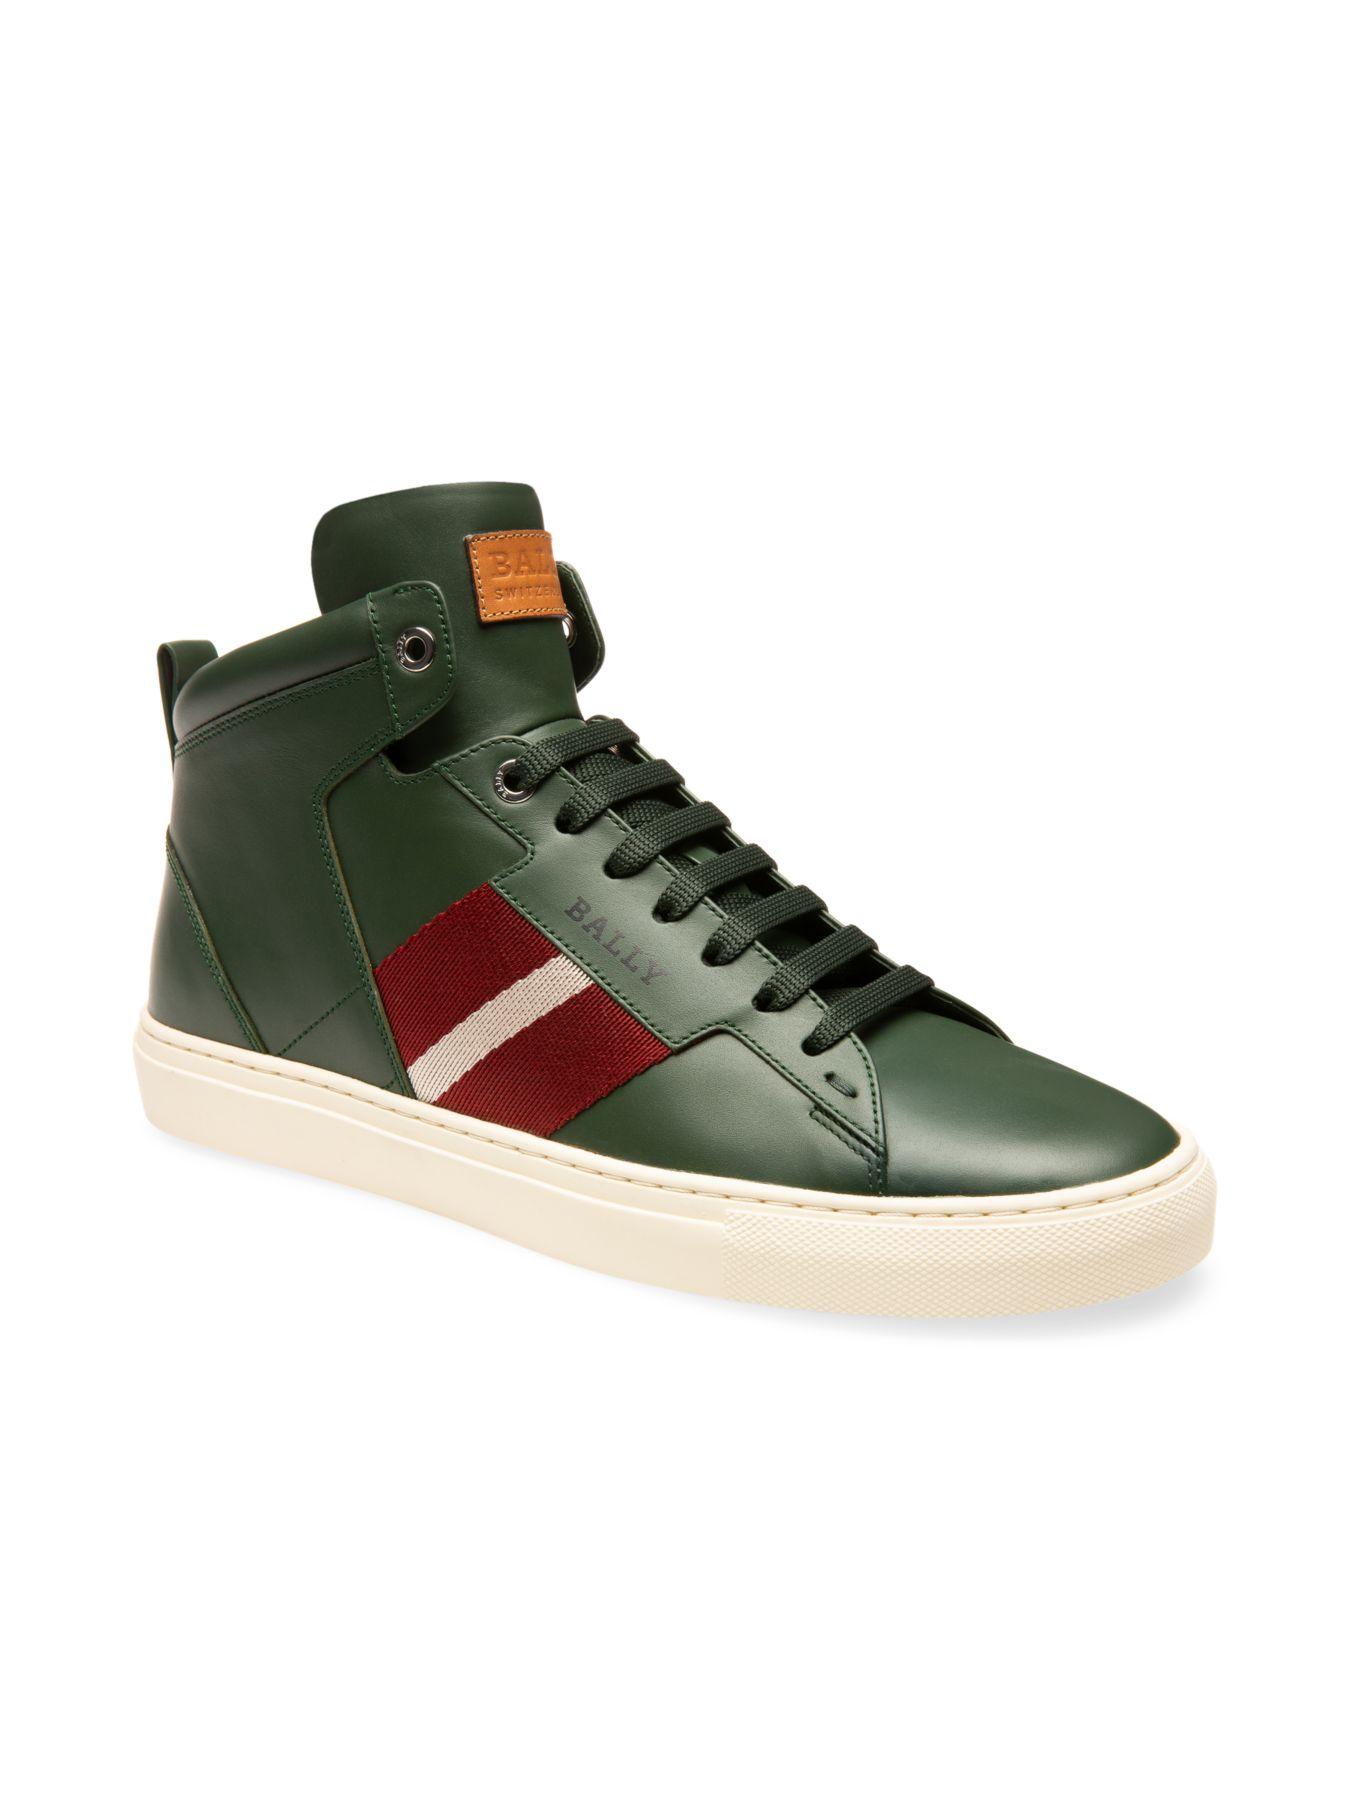 Bally Men's Hedern Trainspotting Leather High-top Sneakers in Green for ...